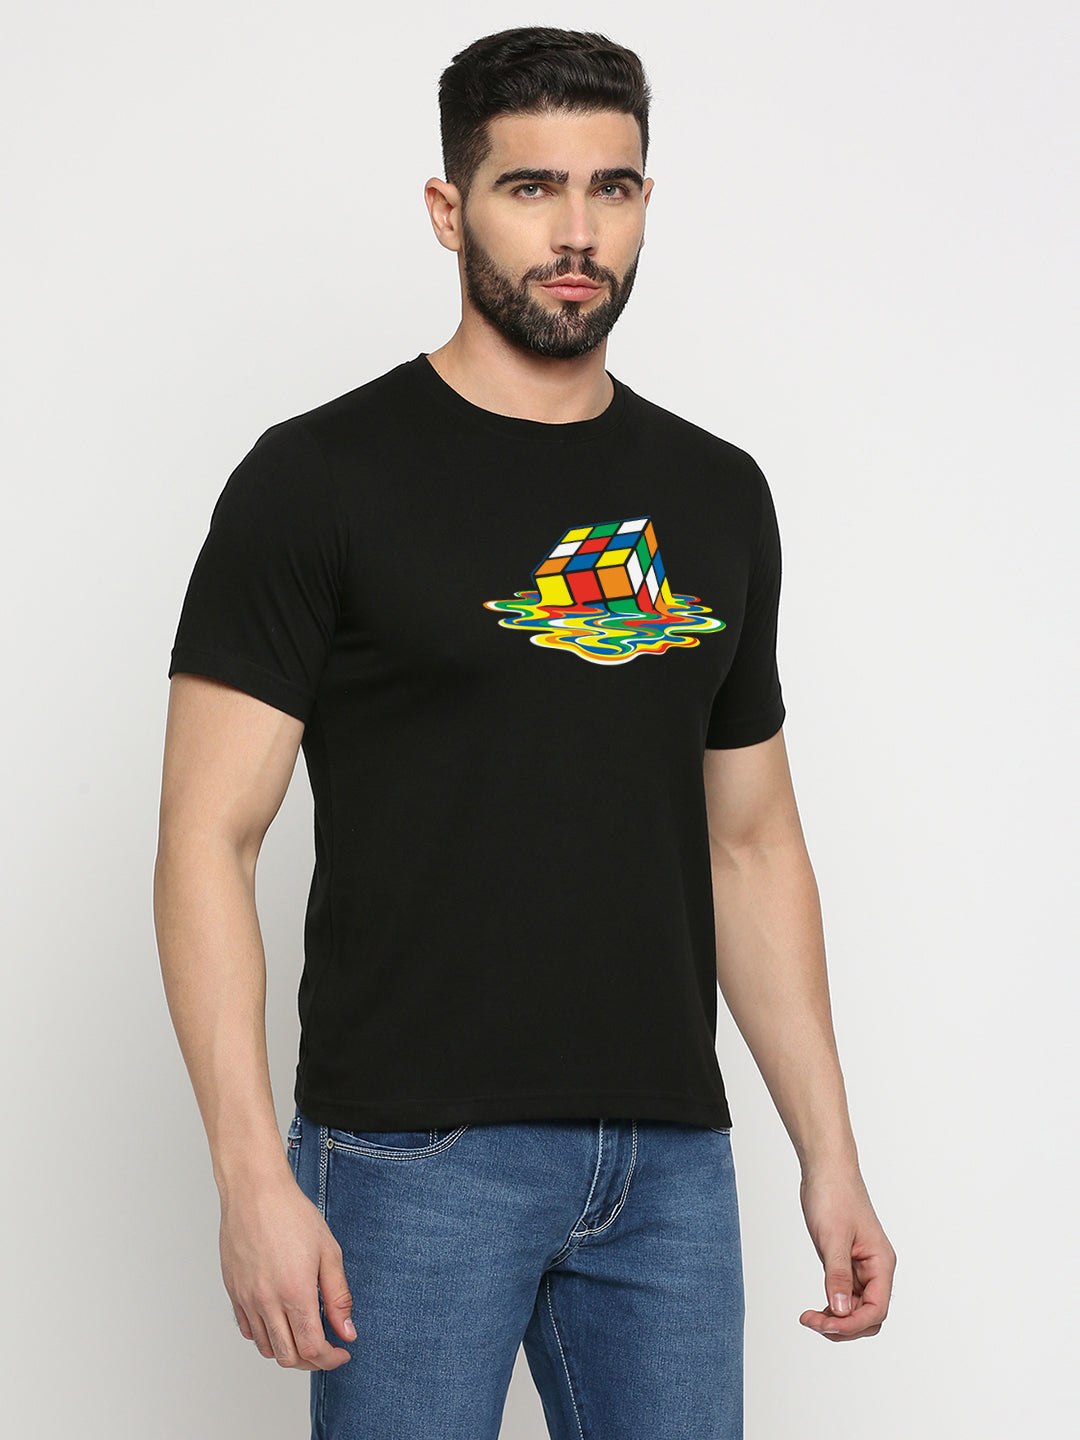 Melted Rubiks Cube T-Shirt